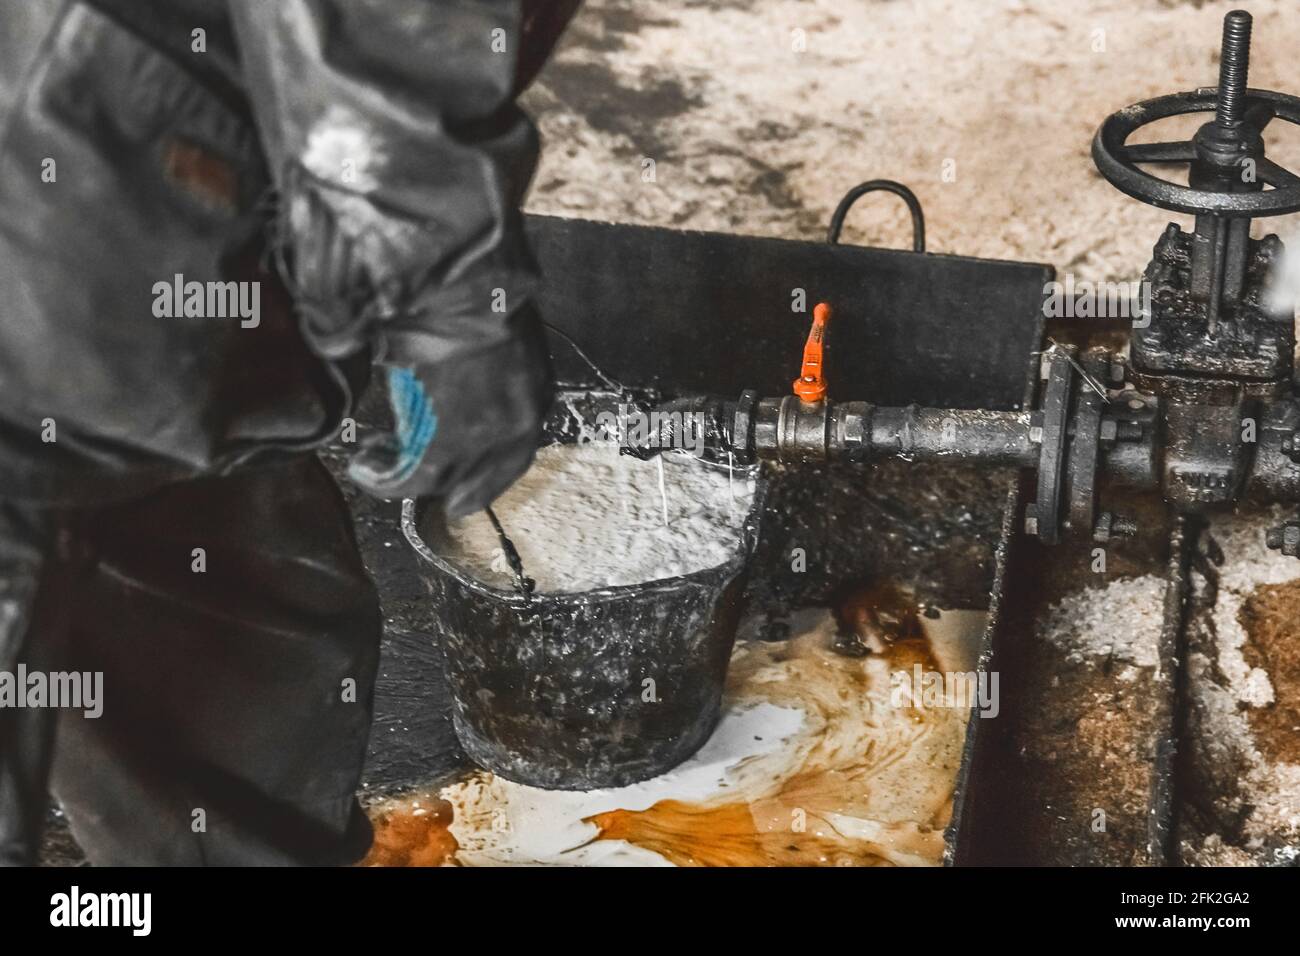 Draining the condensate mixture oil in a bucket from the air compressor pipe at an industrial plant. Stock Photo